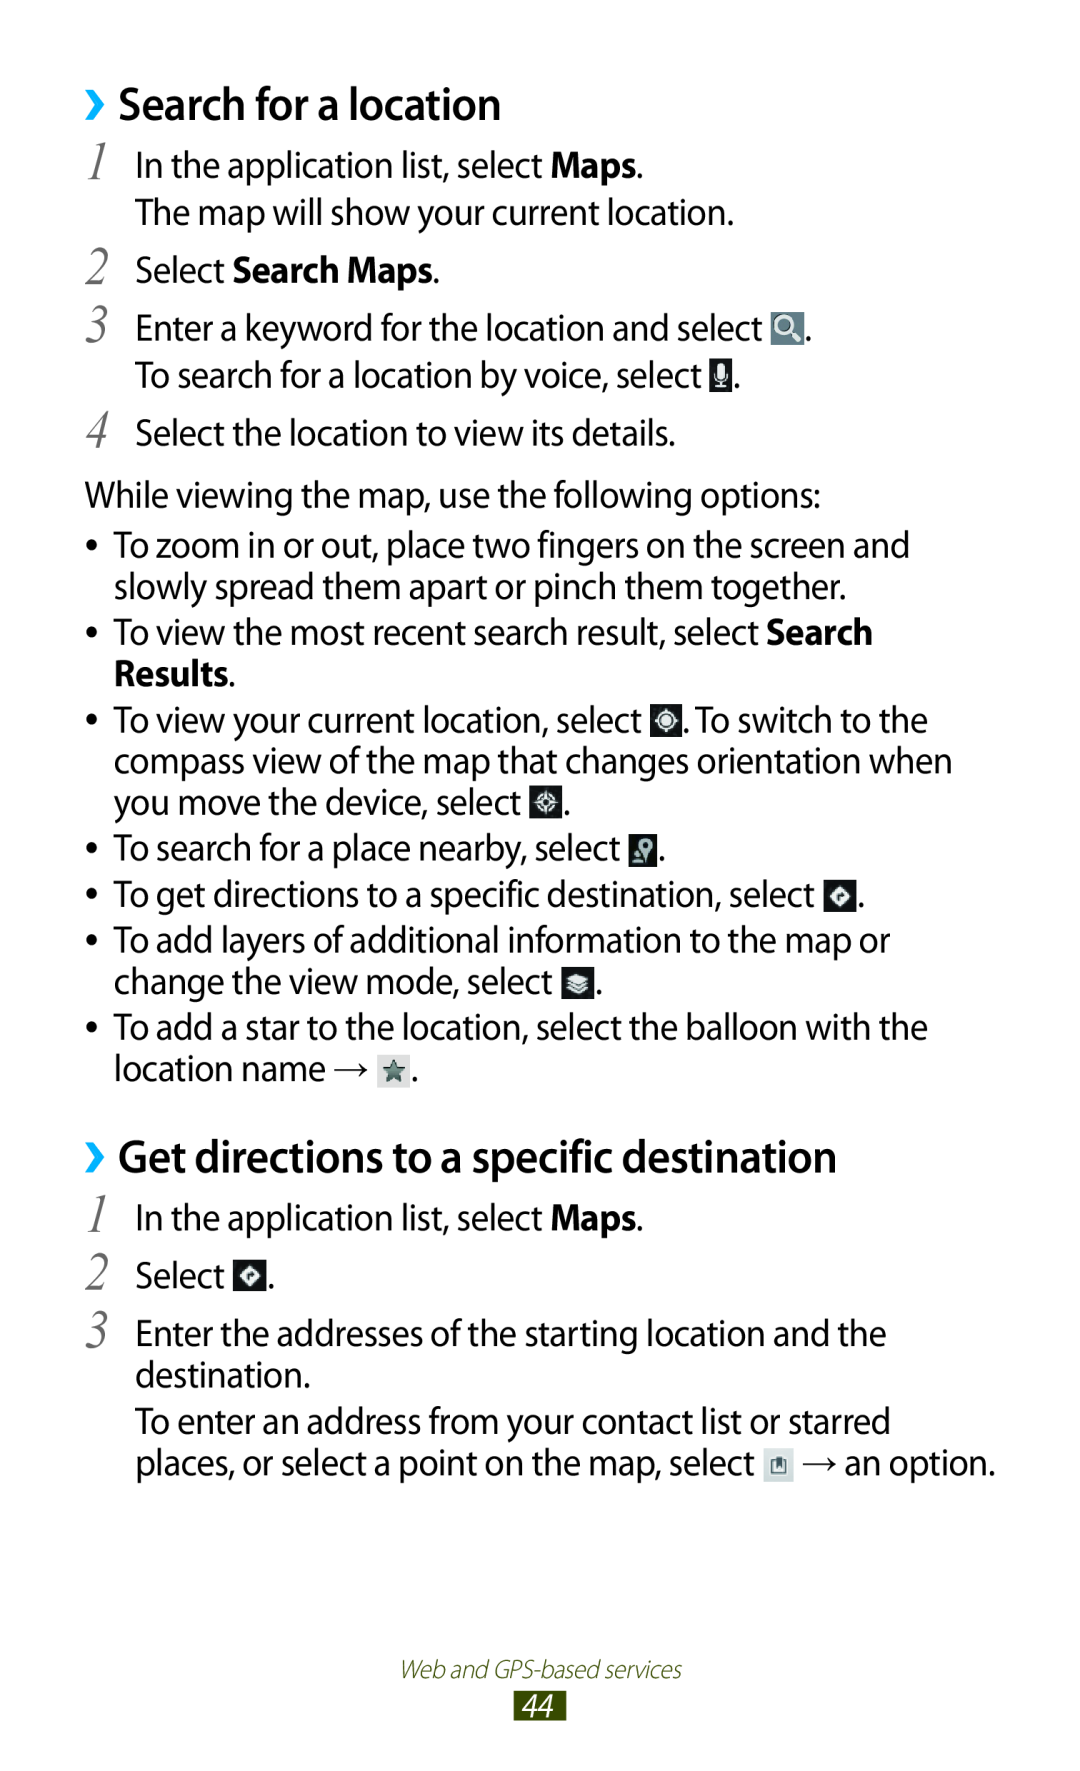 Samsung GT-P7500UWDATL manual Search for a location, ››Get directions to a specific destination, Select Search Maps 